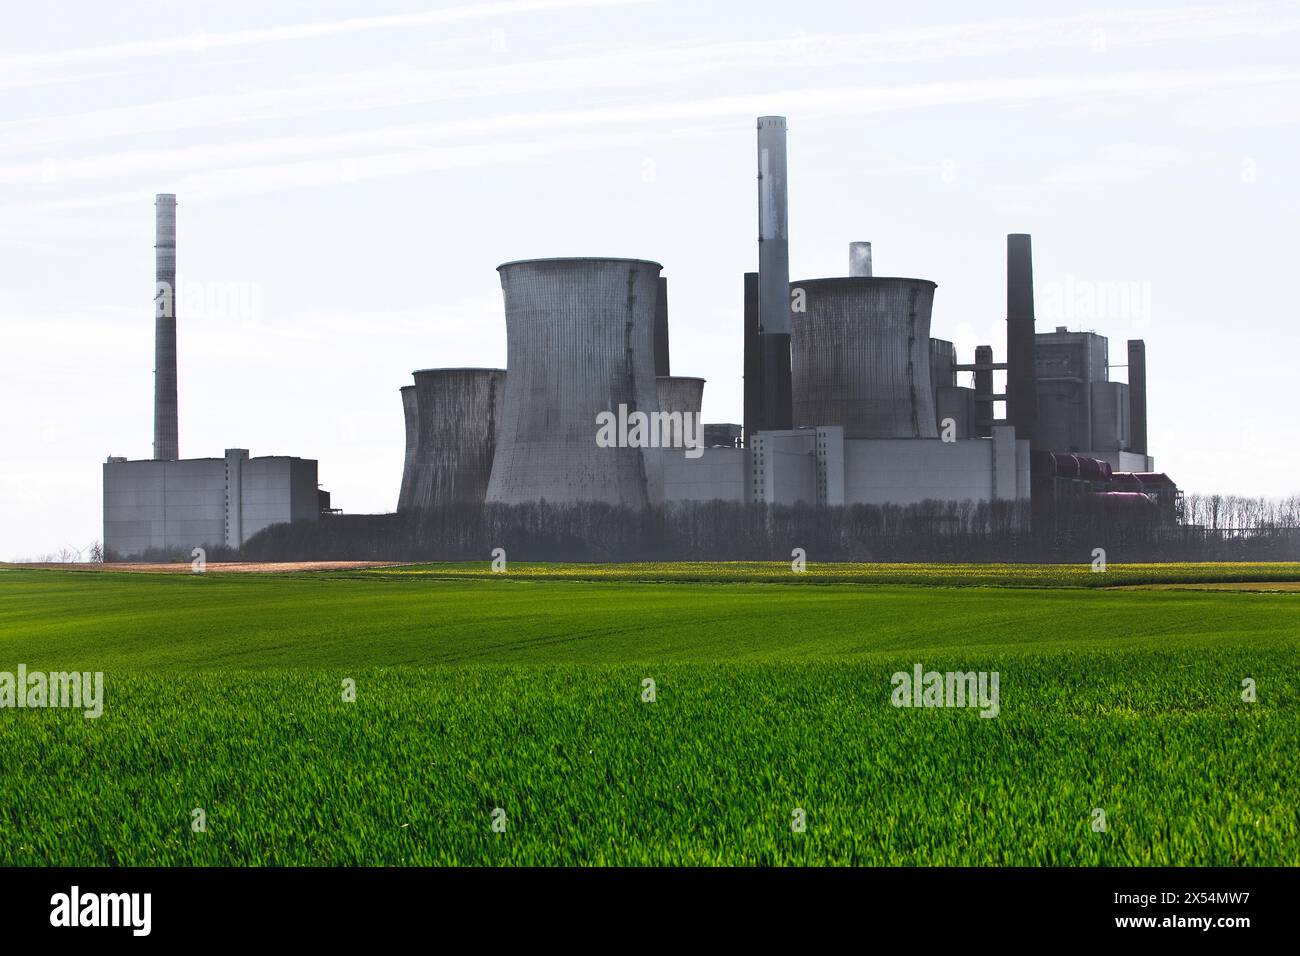 Neurath lignite-fired power station, units A to E shut down and finally decommissioned, Germany, North Rhine-Westphalia, Grevenbroich Stock Photo